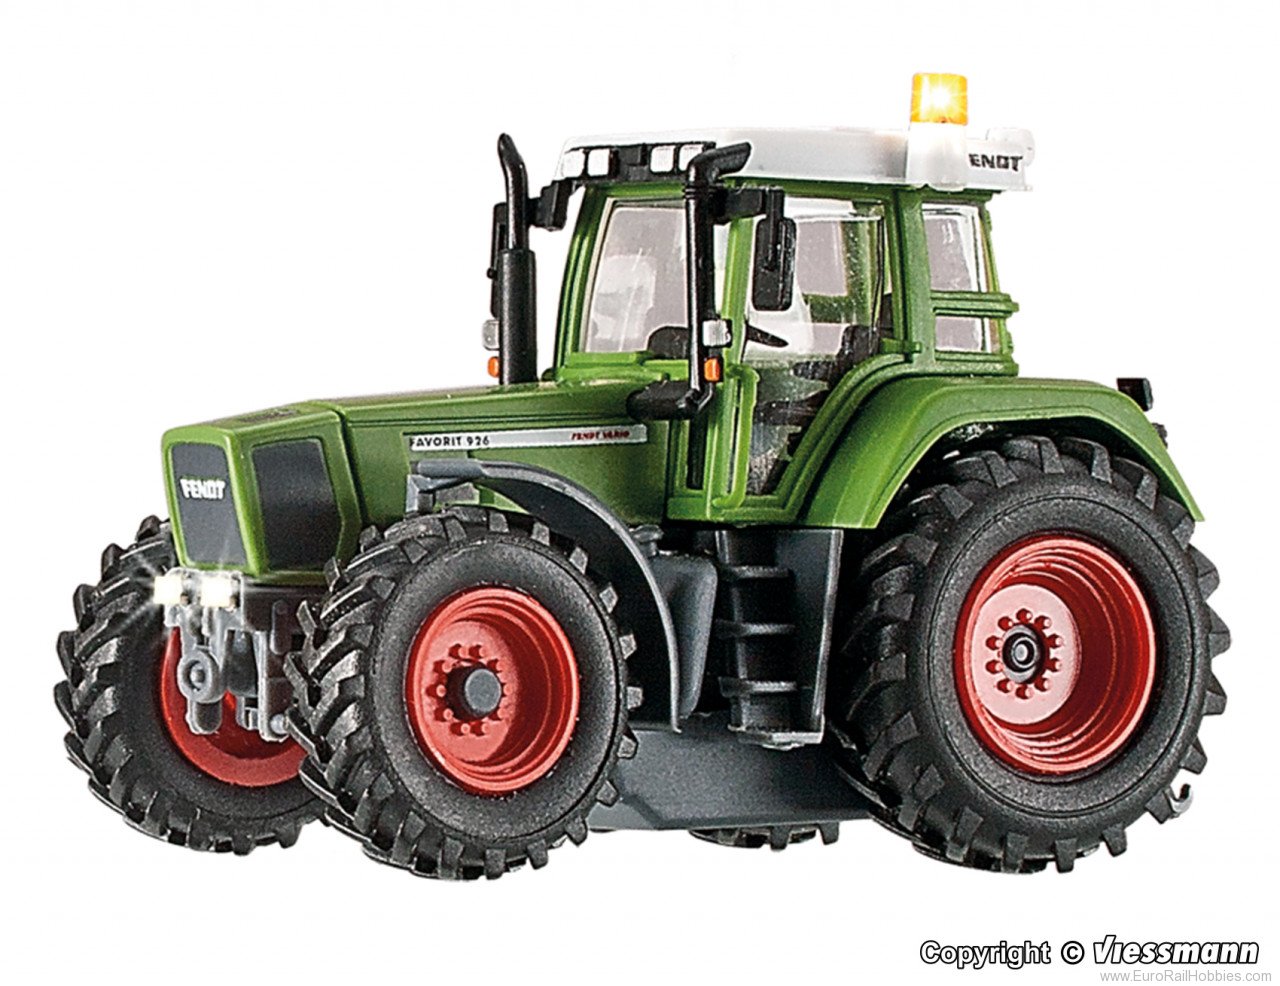 Viessmann 1166 H0 Tractor FENDT with illumination and yellow